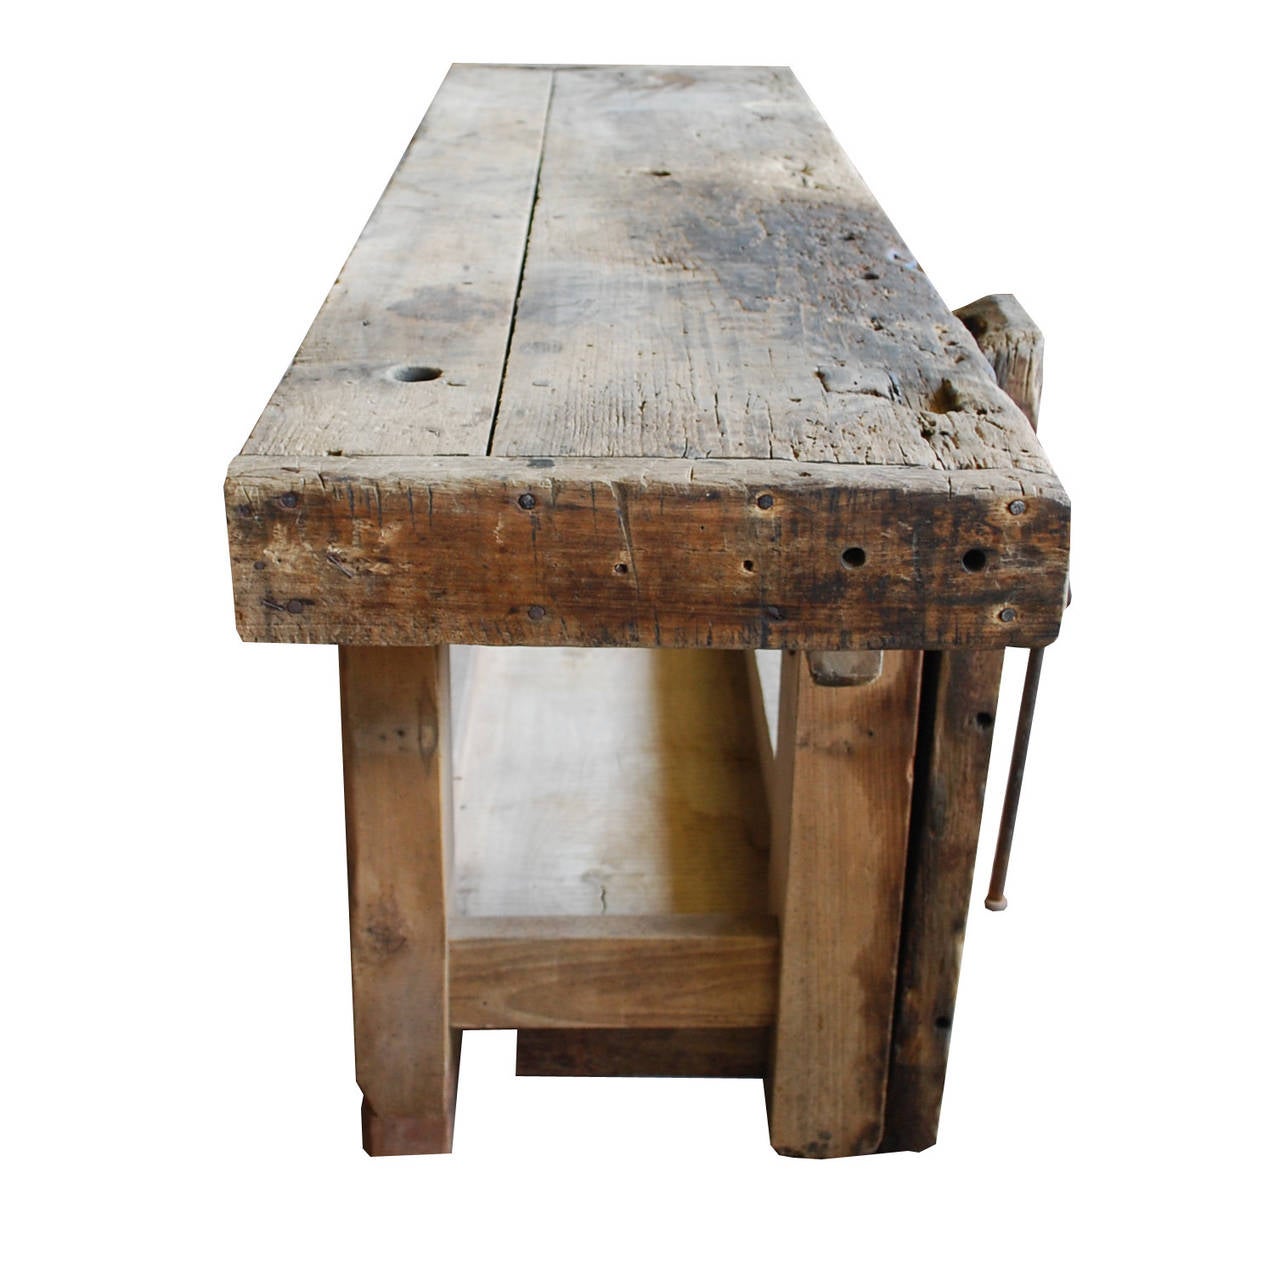 19th century oakwood carpenters workbench.
Can be used as decorative object or side table.
Originates France, dating circa 1880.
(shipping costs on request, depends on destination.)